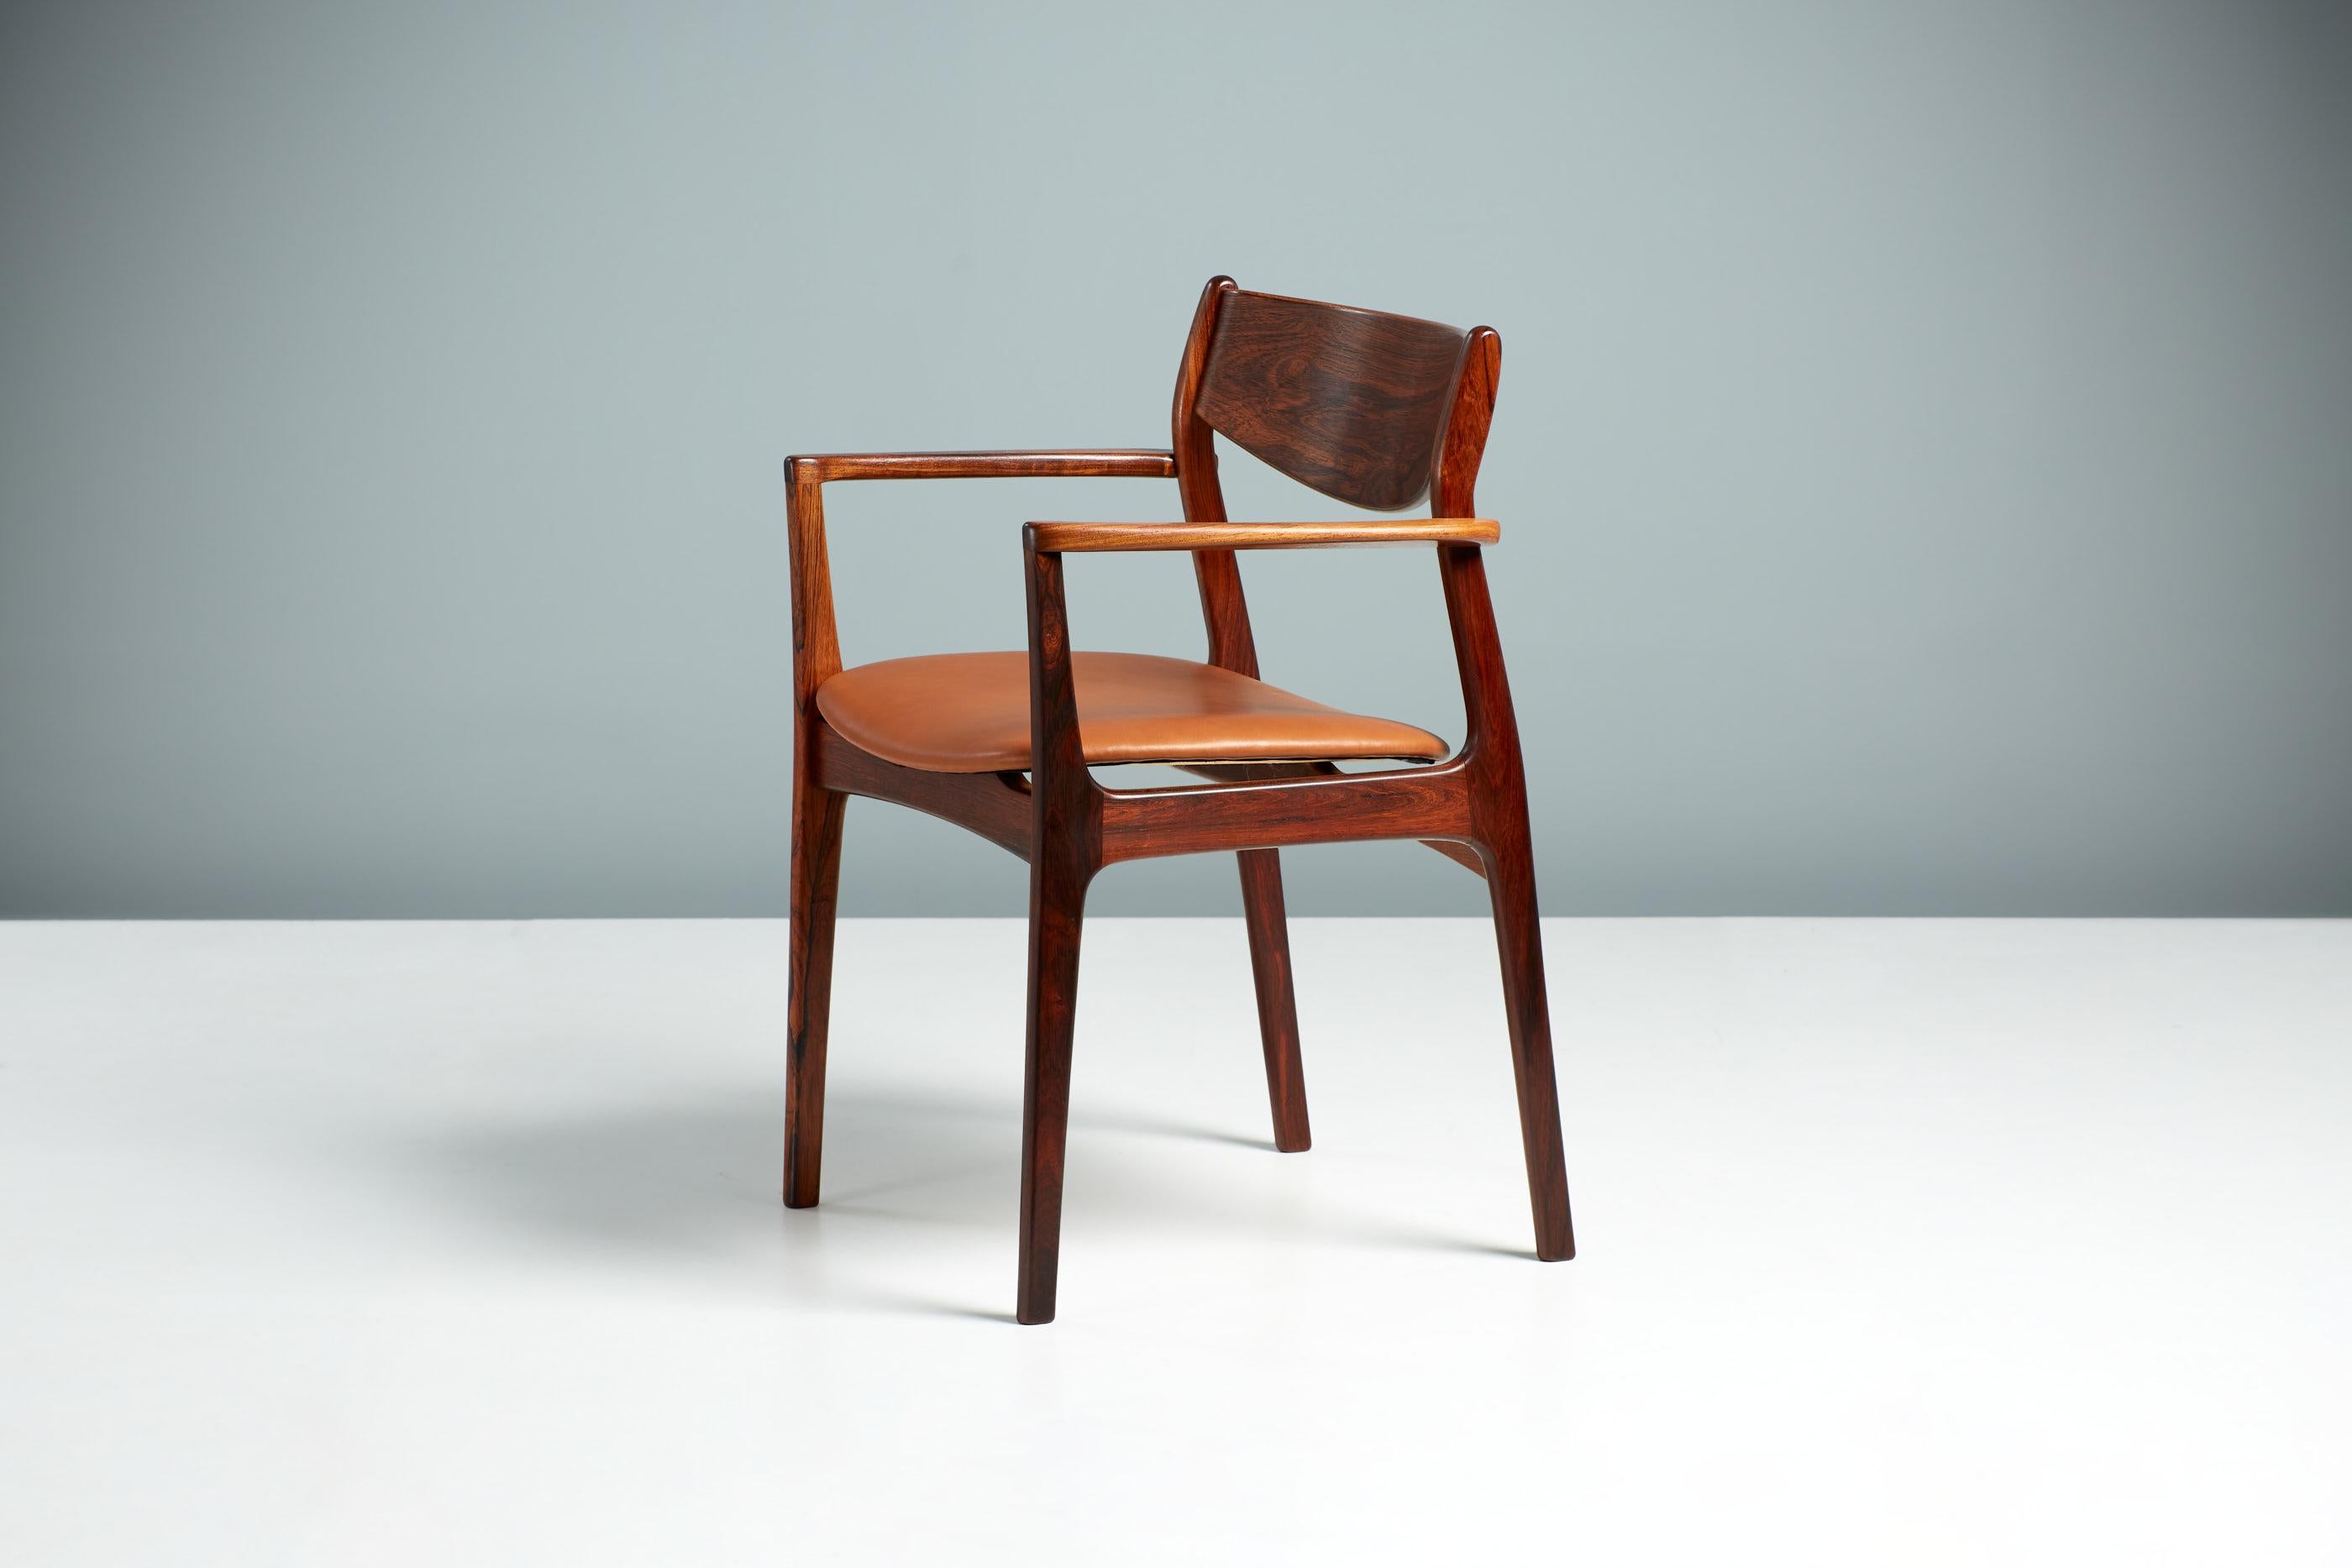 Arne Wahl Iversen - Carver Chair, circa 1960s.

A modernist desk chair by Danish designer Arne Wahl Iversen and produced by Glyngøre Stolefabrik, c1960s. The frame is made from highlighy figured solid and veneered rosewood. The seat has been